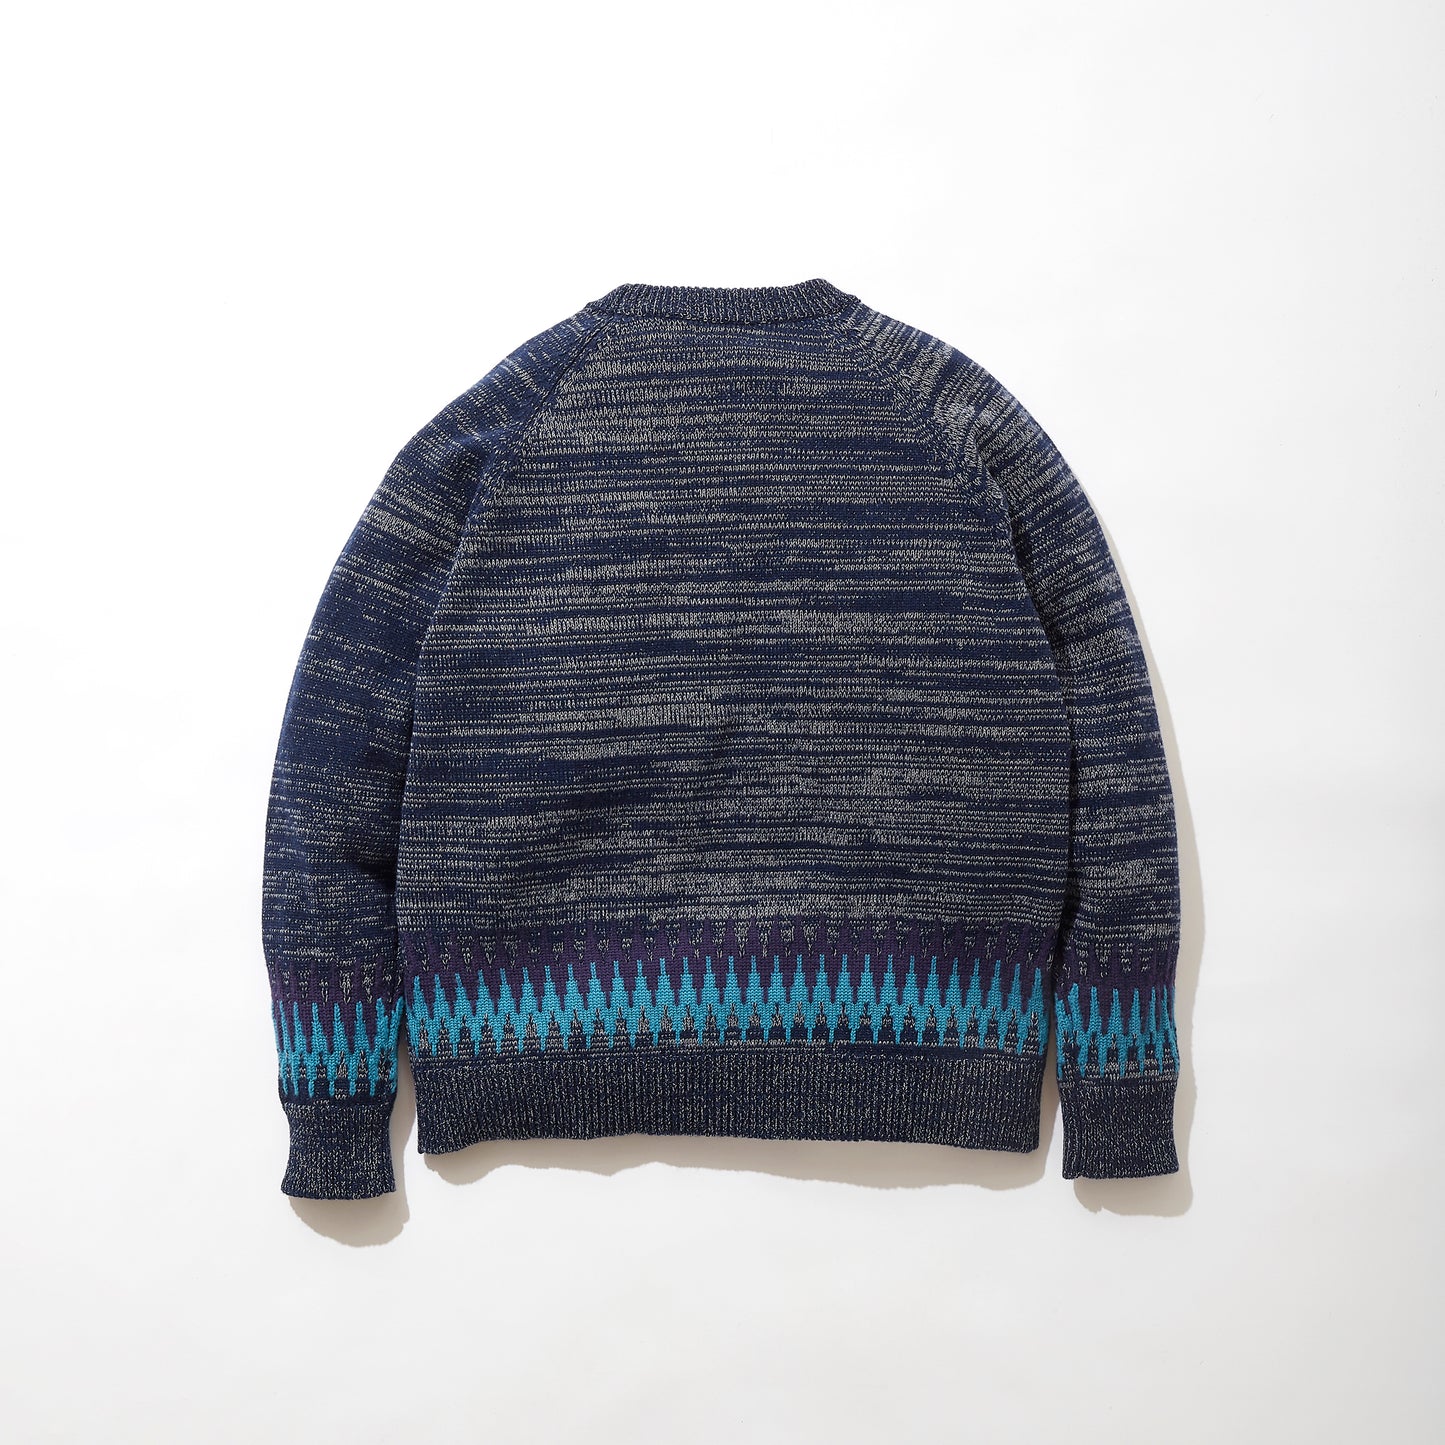 Wool/Plant Dyed Cotton Zig-Zag Sweater